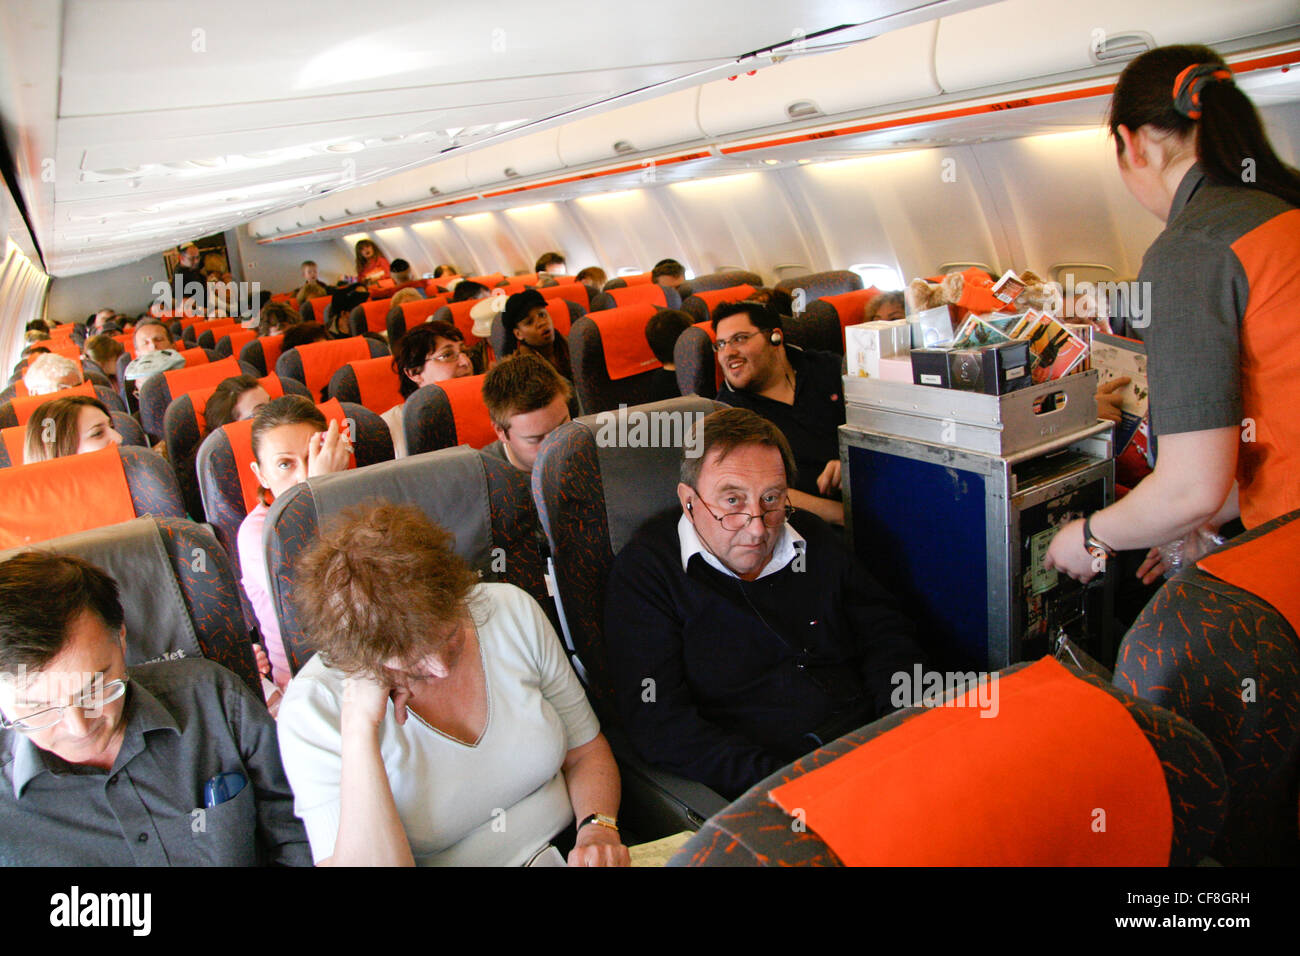 easyjet cabina,Quality assurance,cesinaction.org